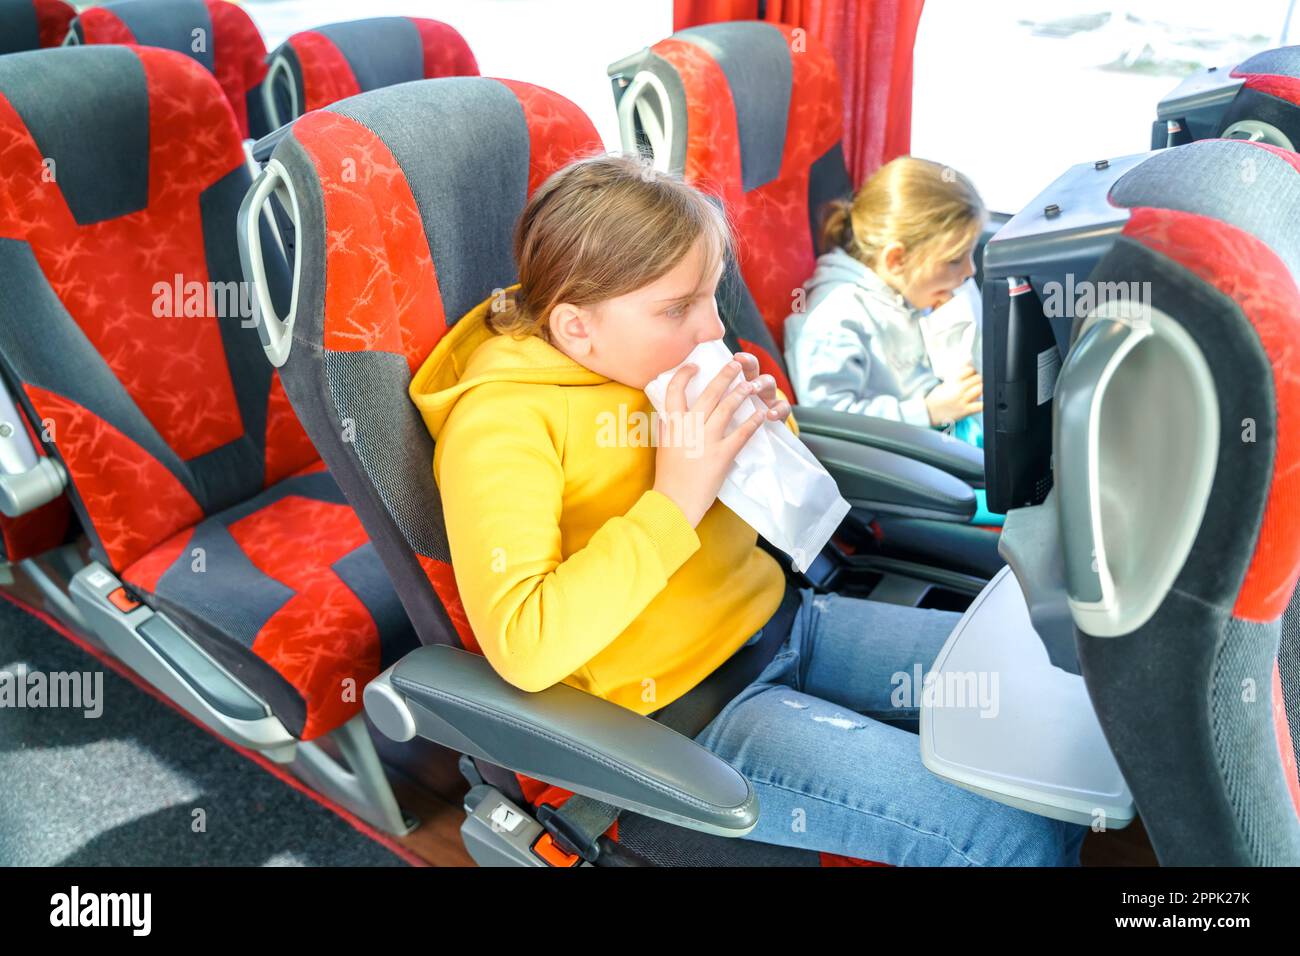 Girl is sick, vomits in bag. Bus road traveling. Girl kid feels bad, rides on large comfortable sightseeing excursion bus. Sitting watching movie cart Stock Photo